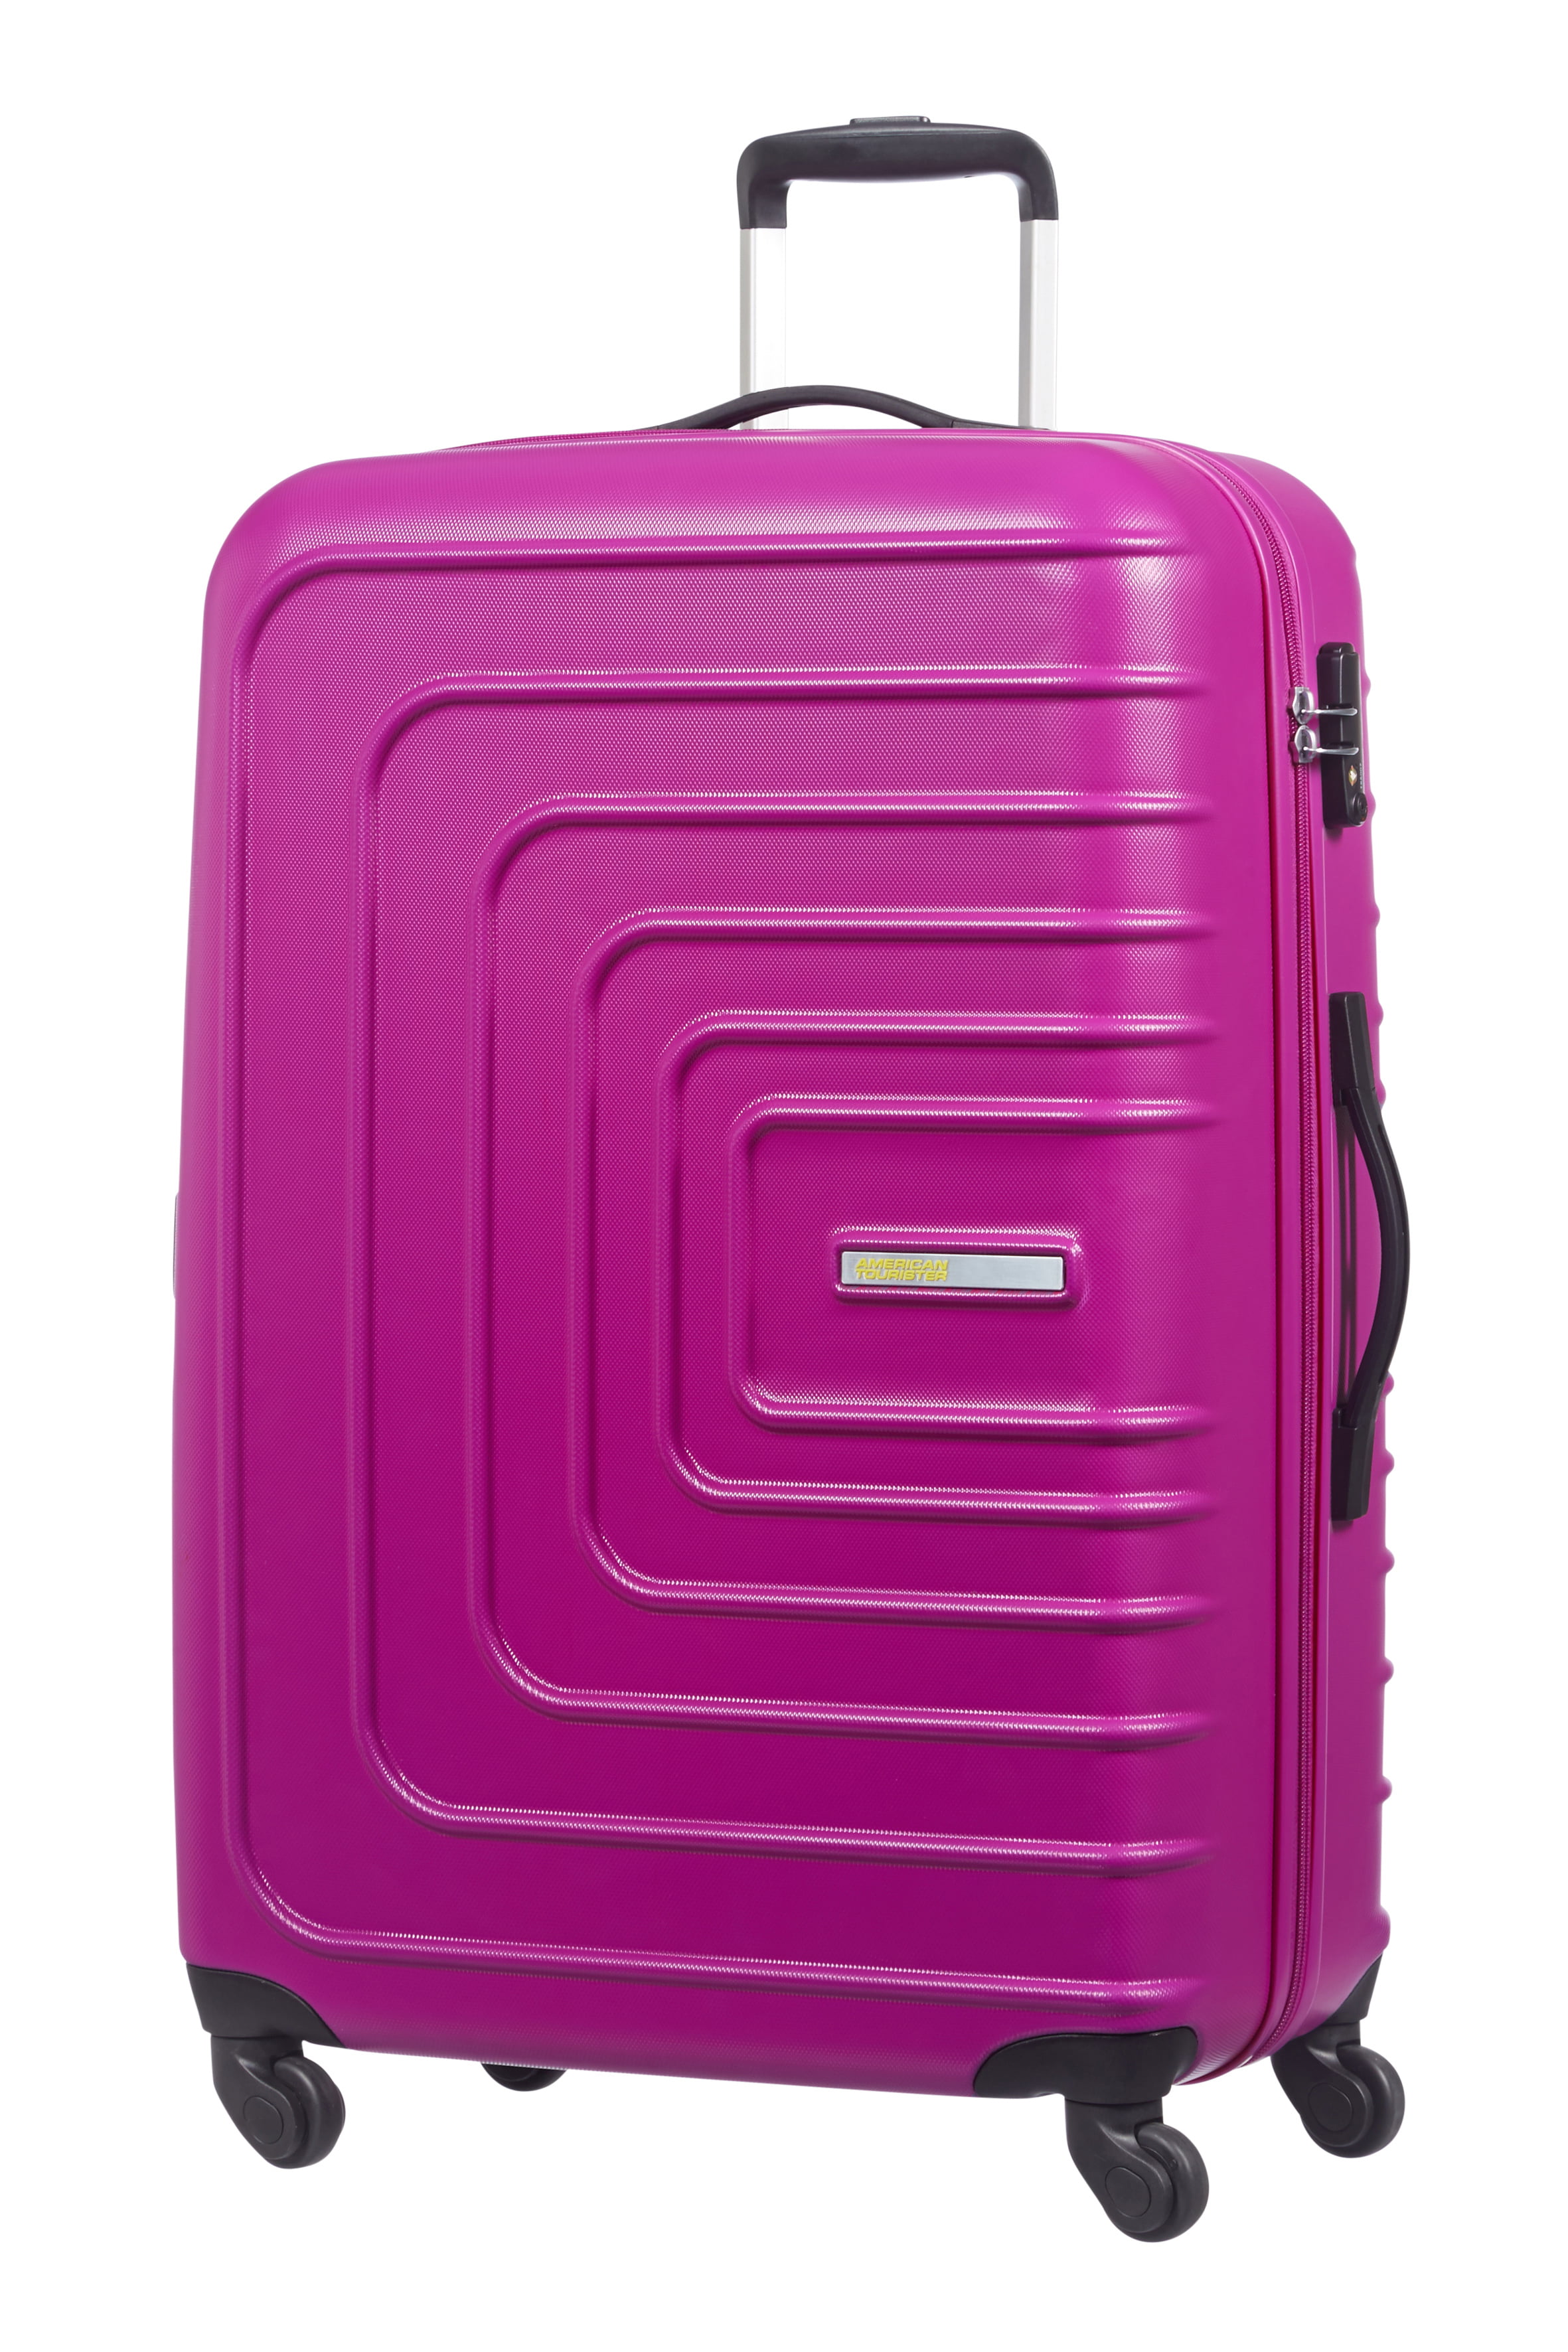 American Tourister - American Tourister Sunset Cruise 28'' Spinner ...